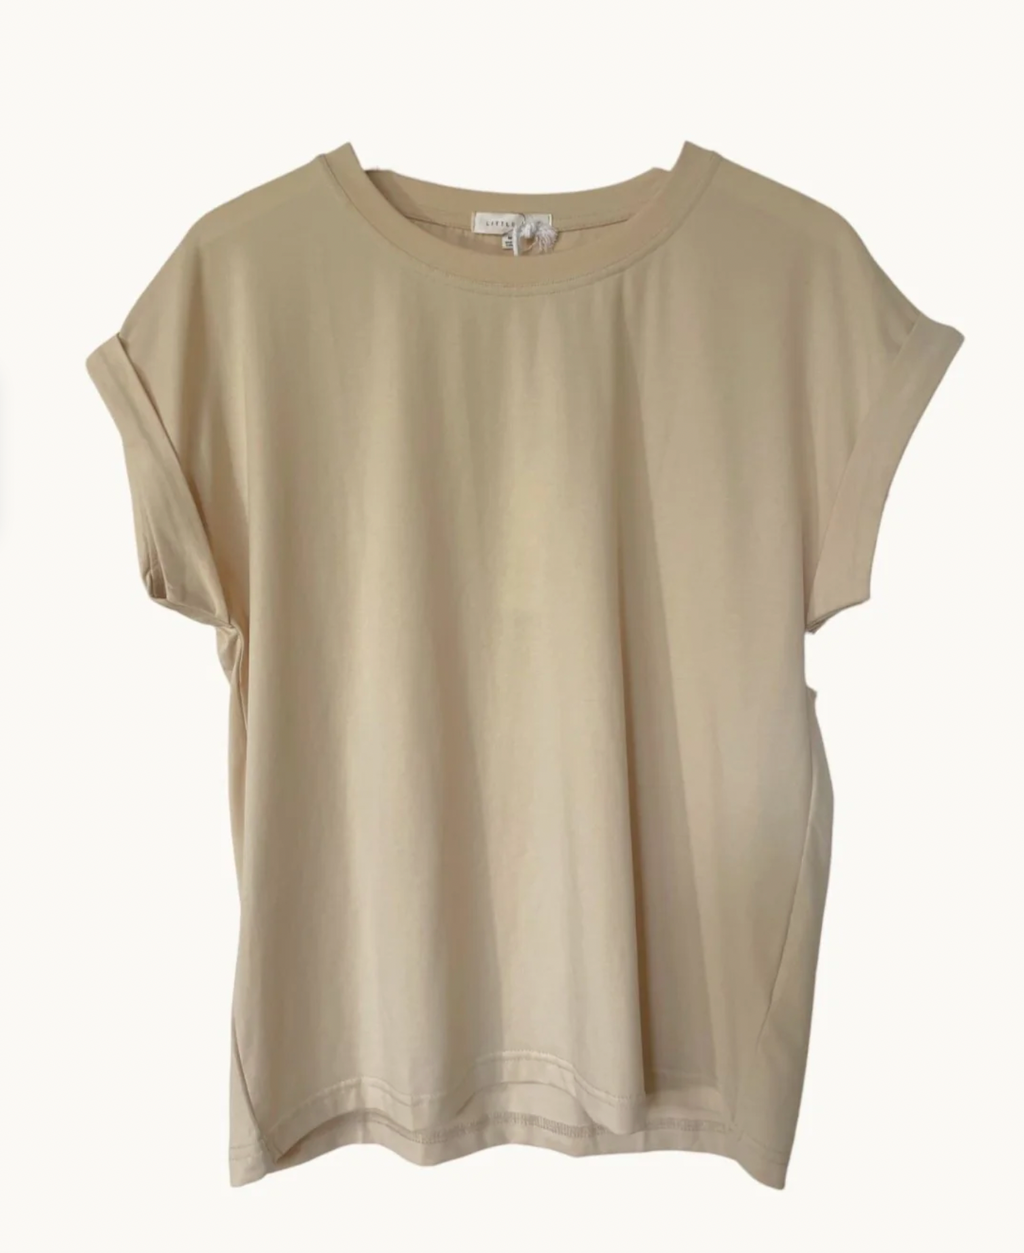 the rhodes tee by little lies is a super soft t shirt with a rolled sleeve in high quality cotton blend